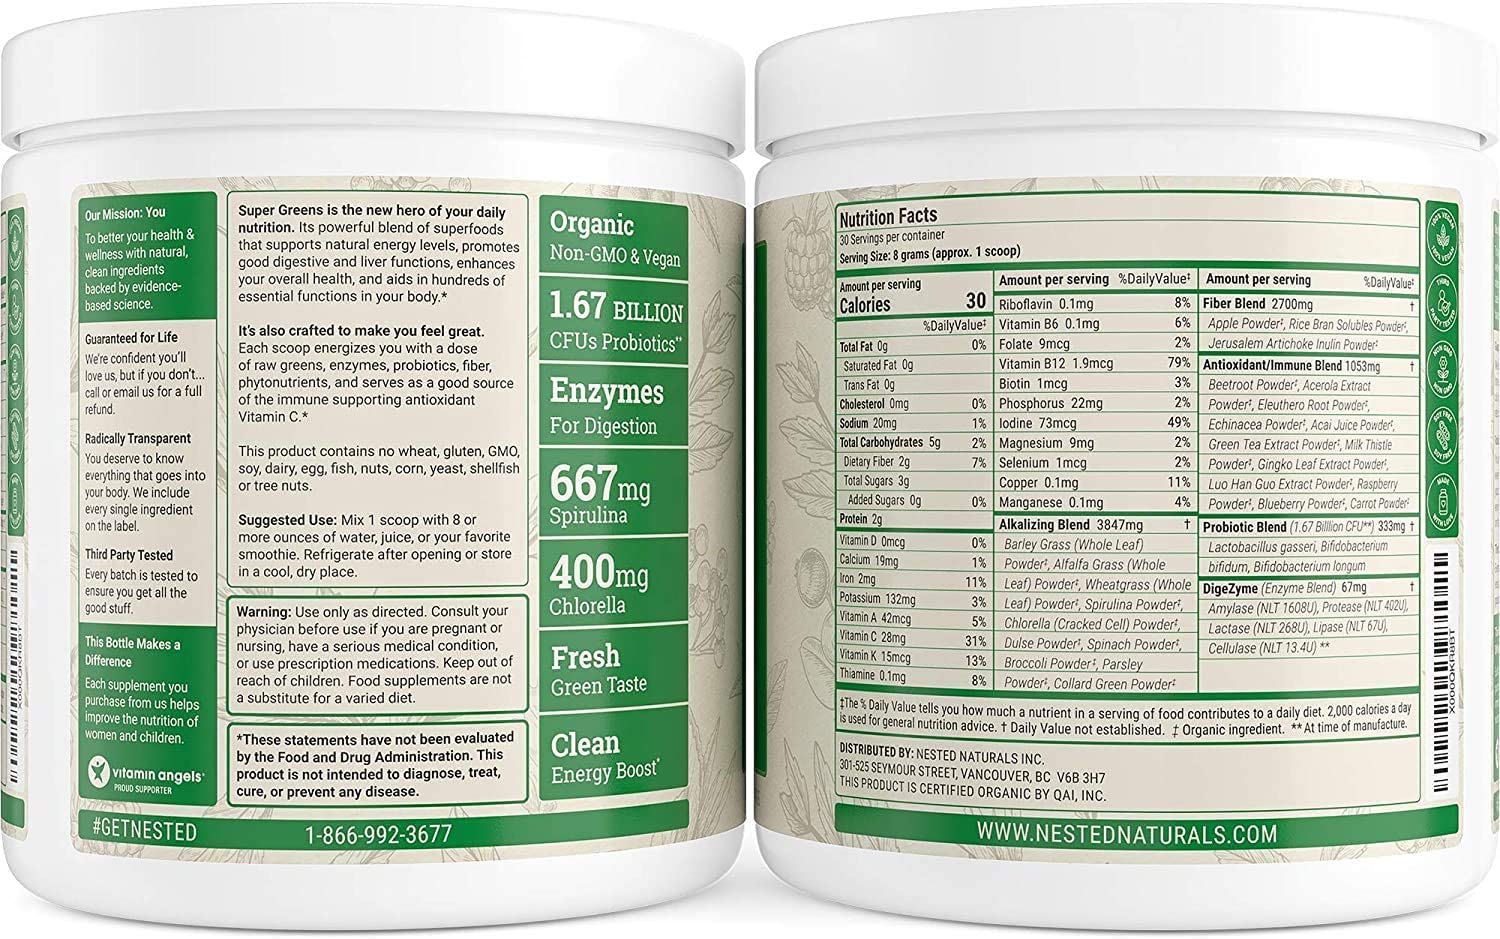 Nested naturals super greens ingredients and supplement facts